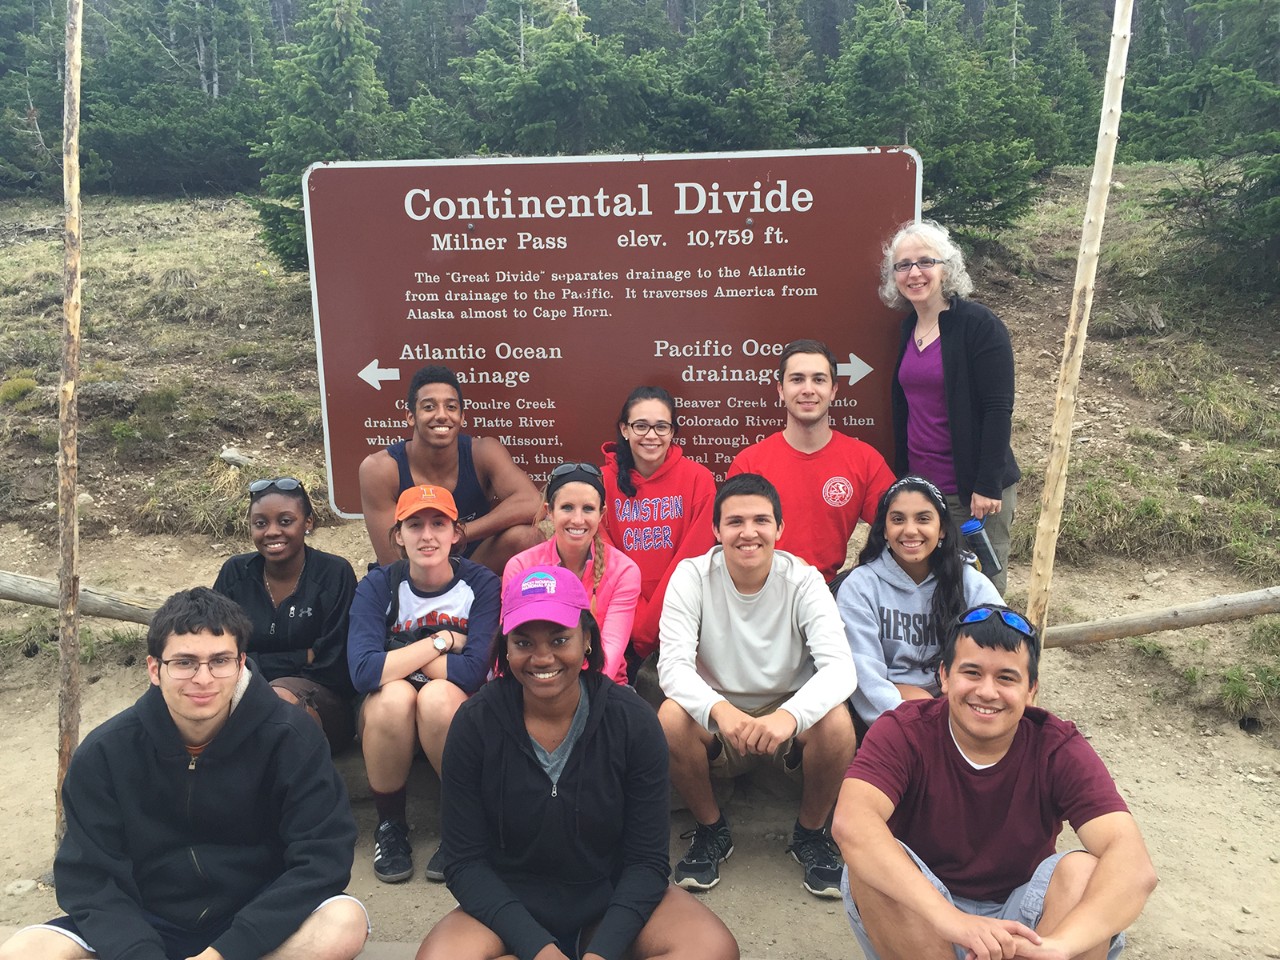 LaDue posed with class at 'Continental Divide' site